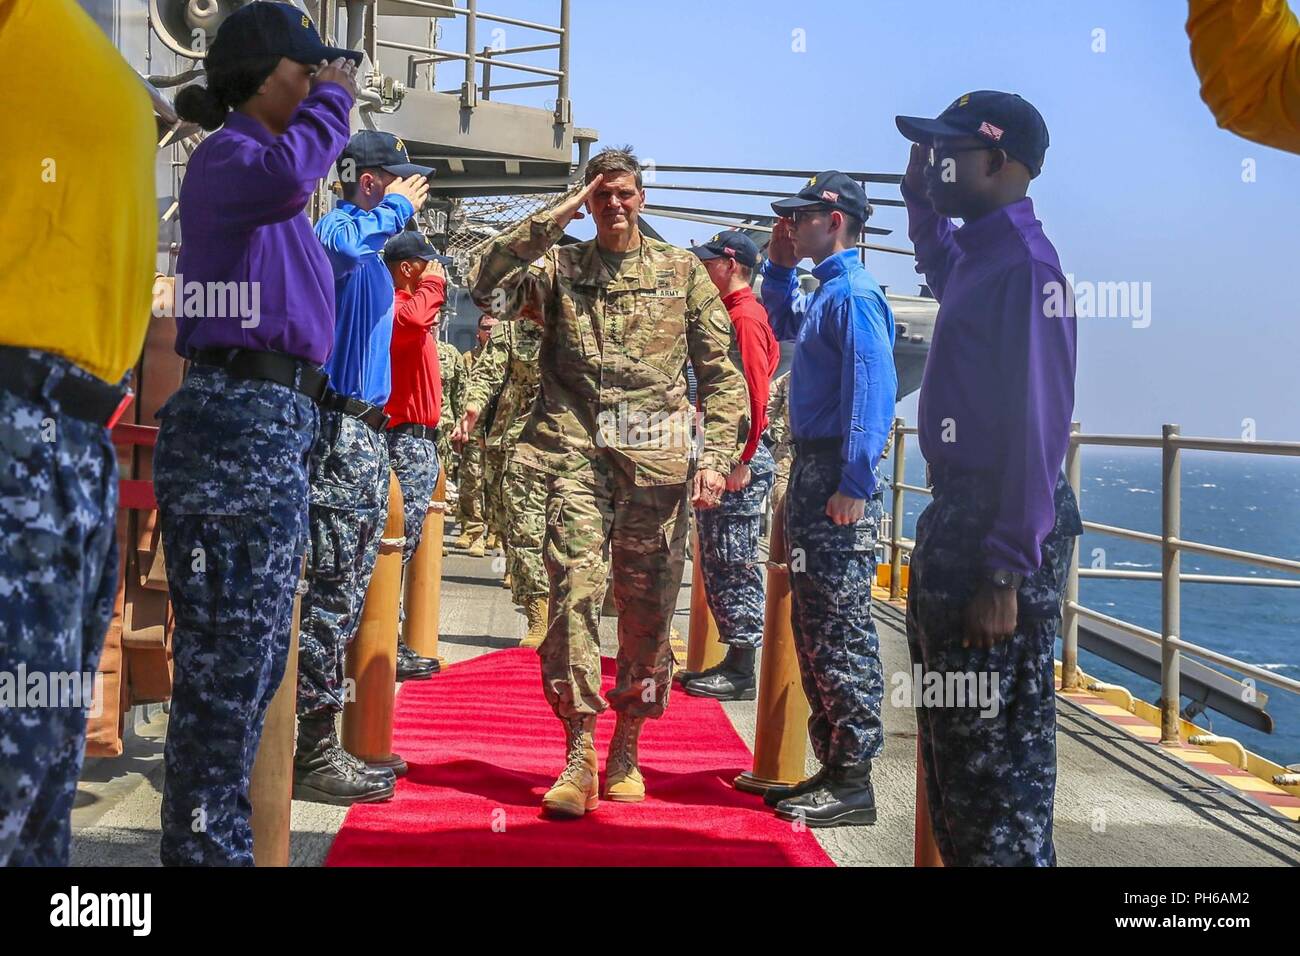 ARABIAN GULF (June 22, 2018) U.S. Army Gen. Joseph Votel, commander, U.S. Central Command,  salutes Sailors as he is welcomed aboard the Wasp-class amphibious assault ship USS Iwo Jima (LHD 7), June 22, 2018. Votel, Vice Adm. Scott Stearney, commander, U.S. Naval Forces Central Command, and other distinguished visitors took a tour of Iwo Jima and spoke with crew members and Marines with the 26th Marine Expeditionary Unit, who are currently deployed to the U.S. 5th Fleet of operations in support of maritime security operations to reassure allies and partners and preserve the freedom of navigati Stock Photo